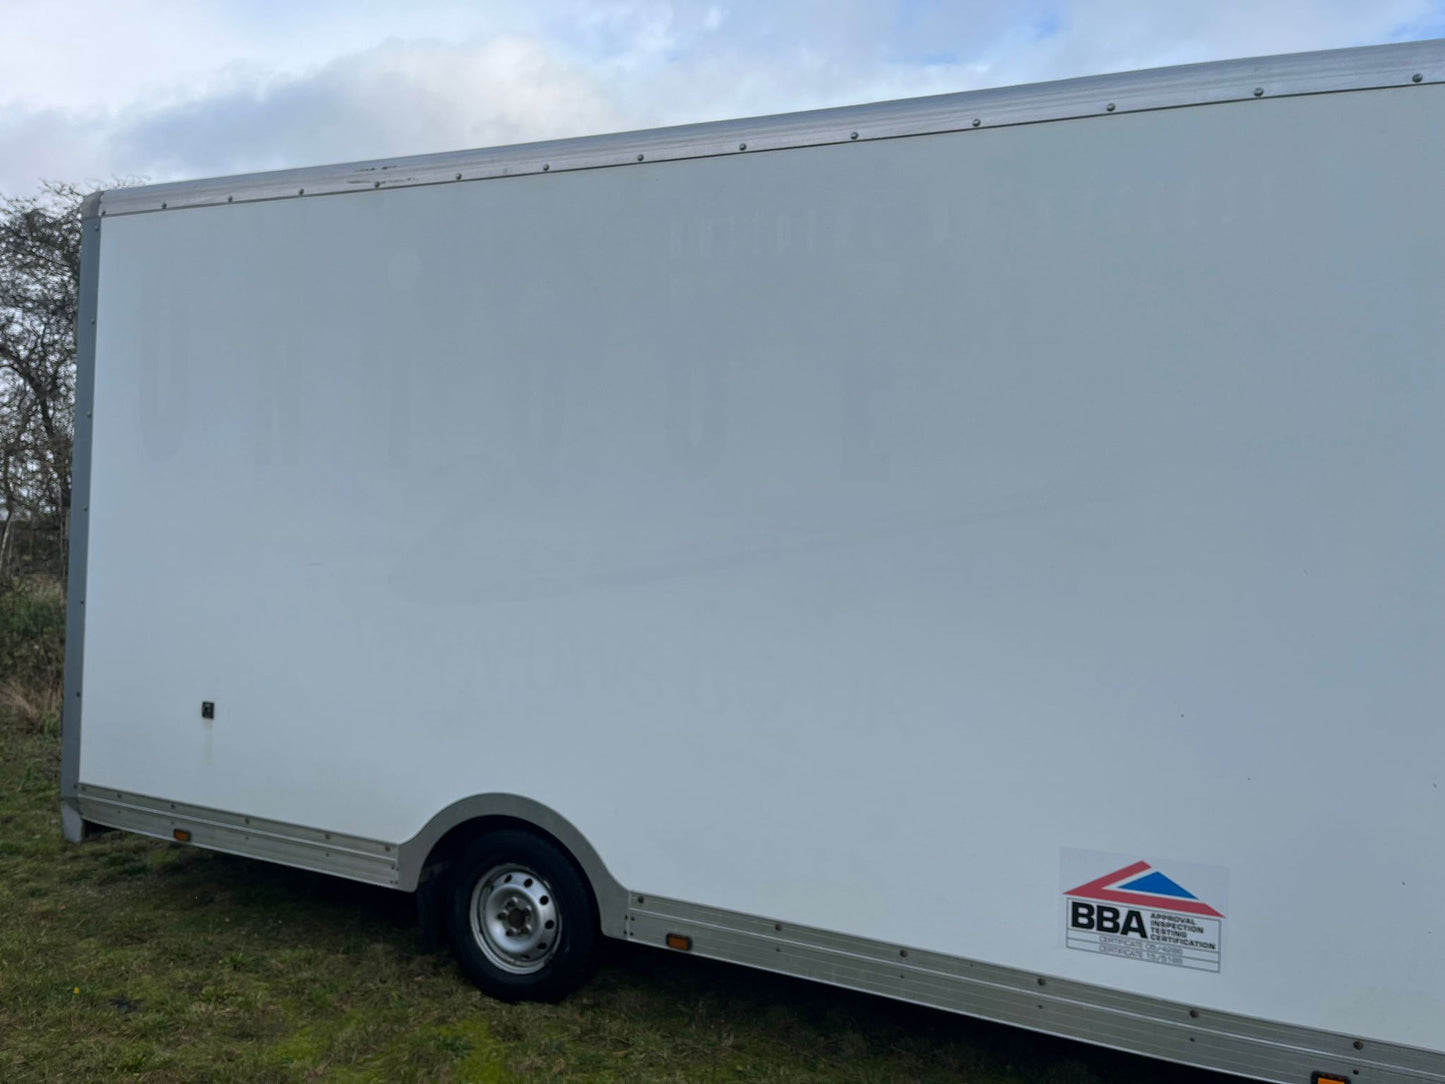 Bid on ONE OWNER GEM: 2018 PEUGEOT BOXER BOX VAN- Buy &amp; Sell on Auction with EAMA Group